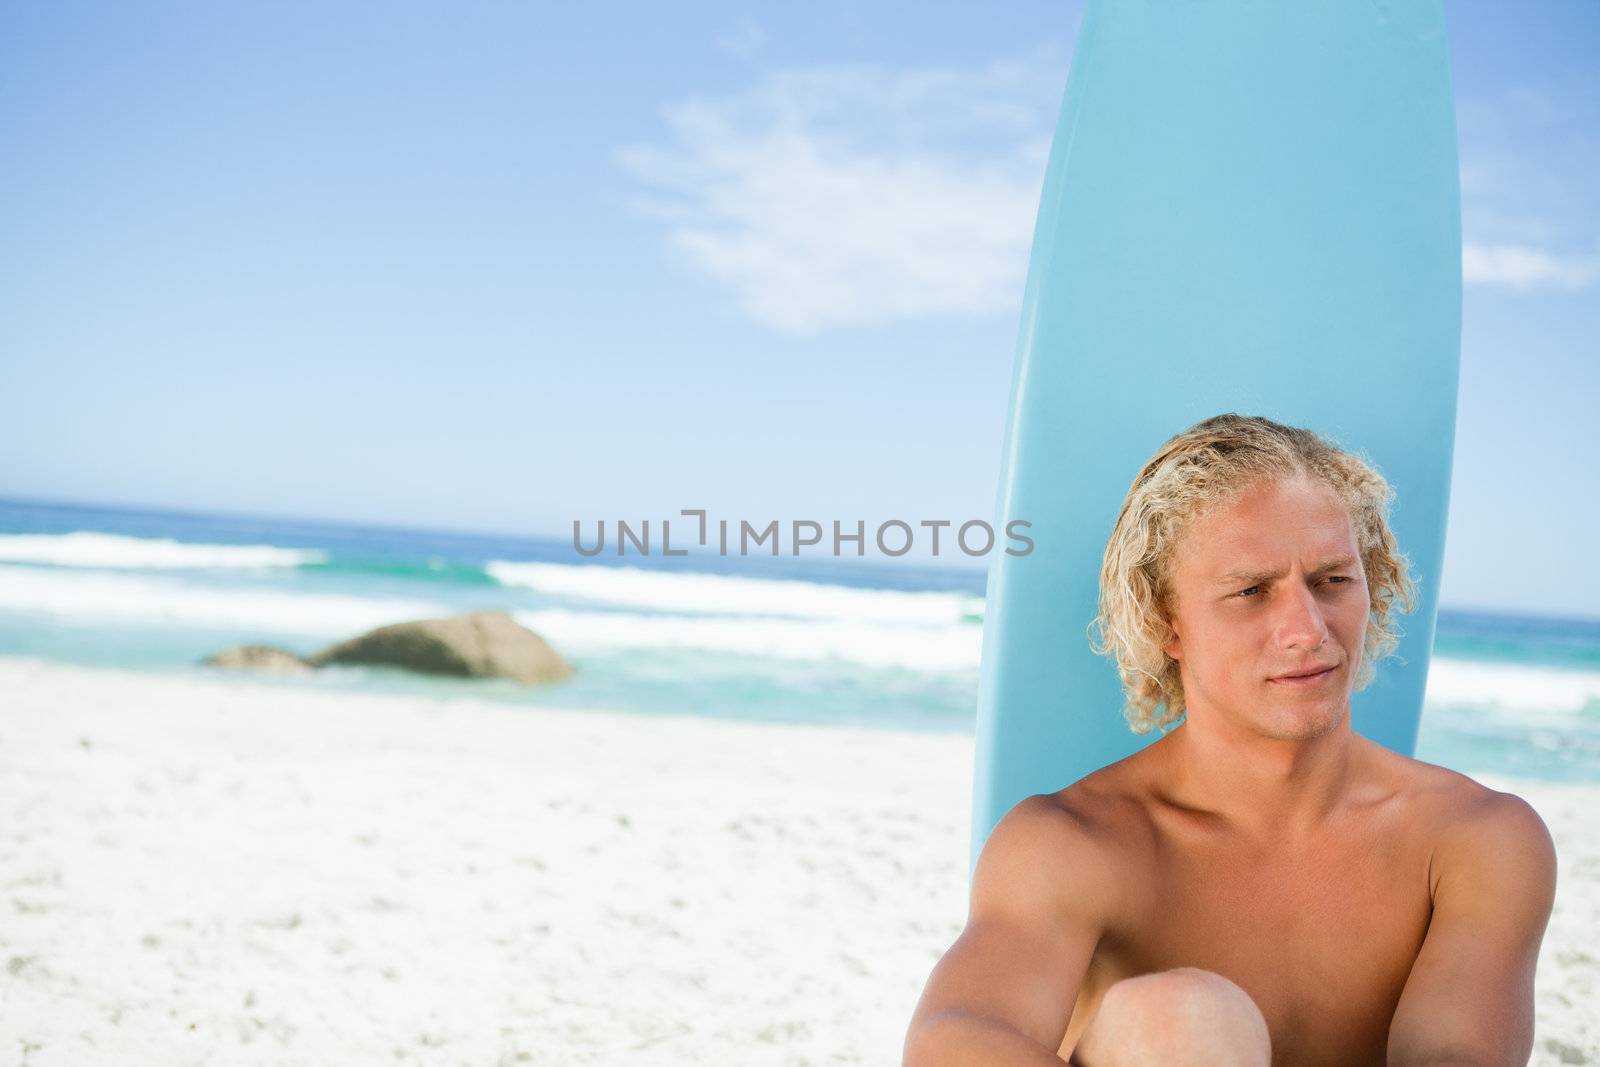 Blonde man sitting on the beach with his surfboard while looking towards the side